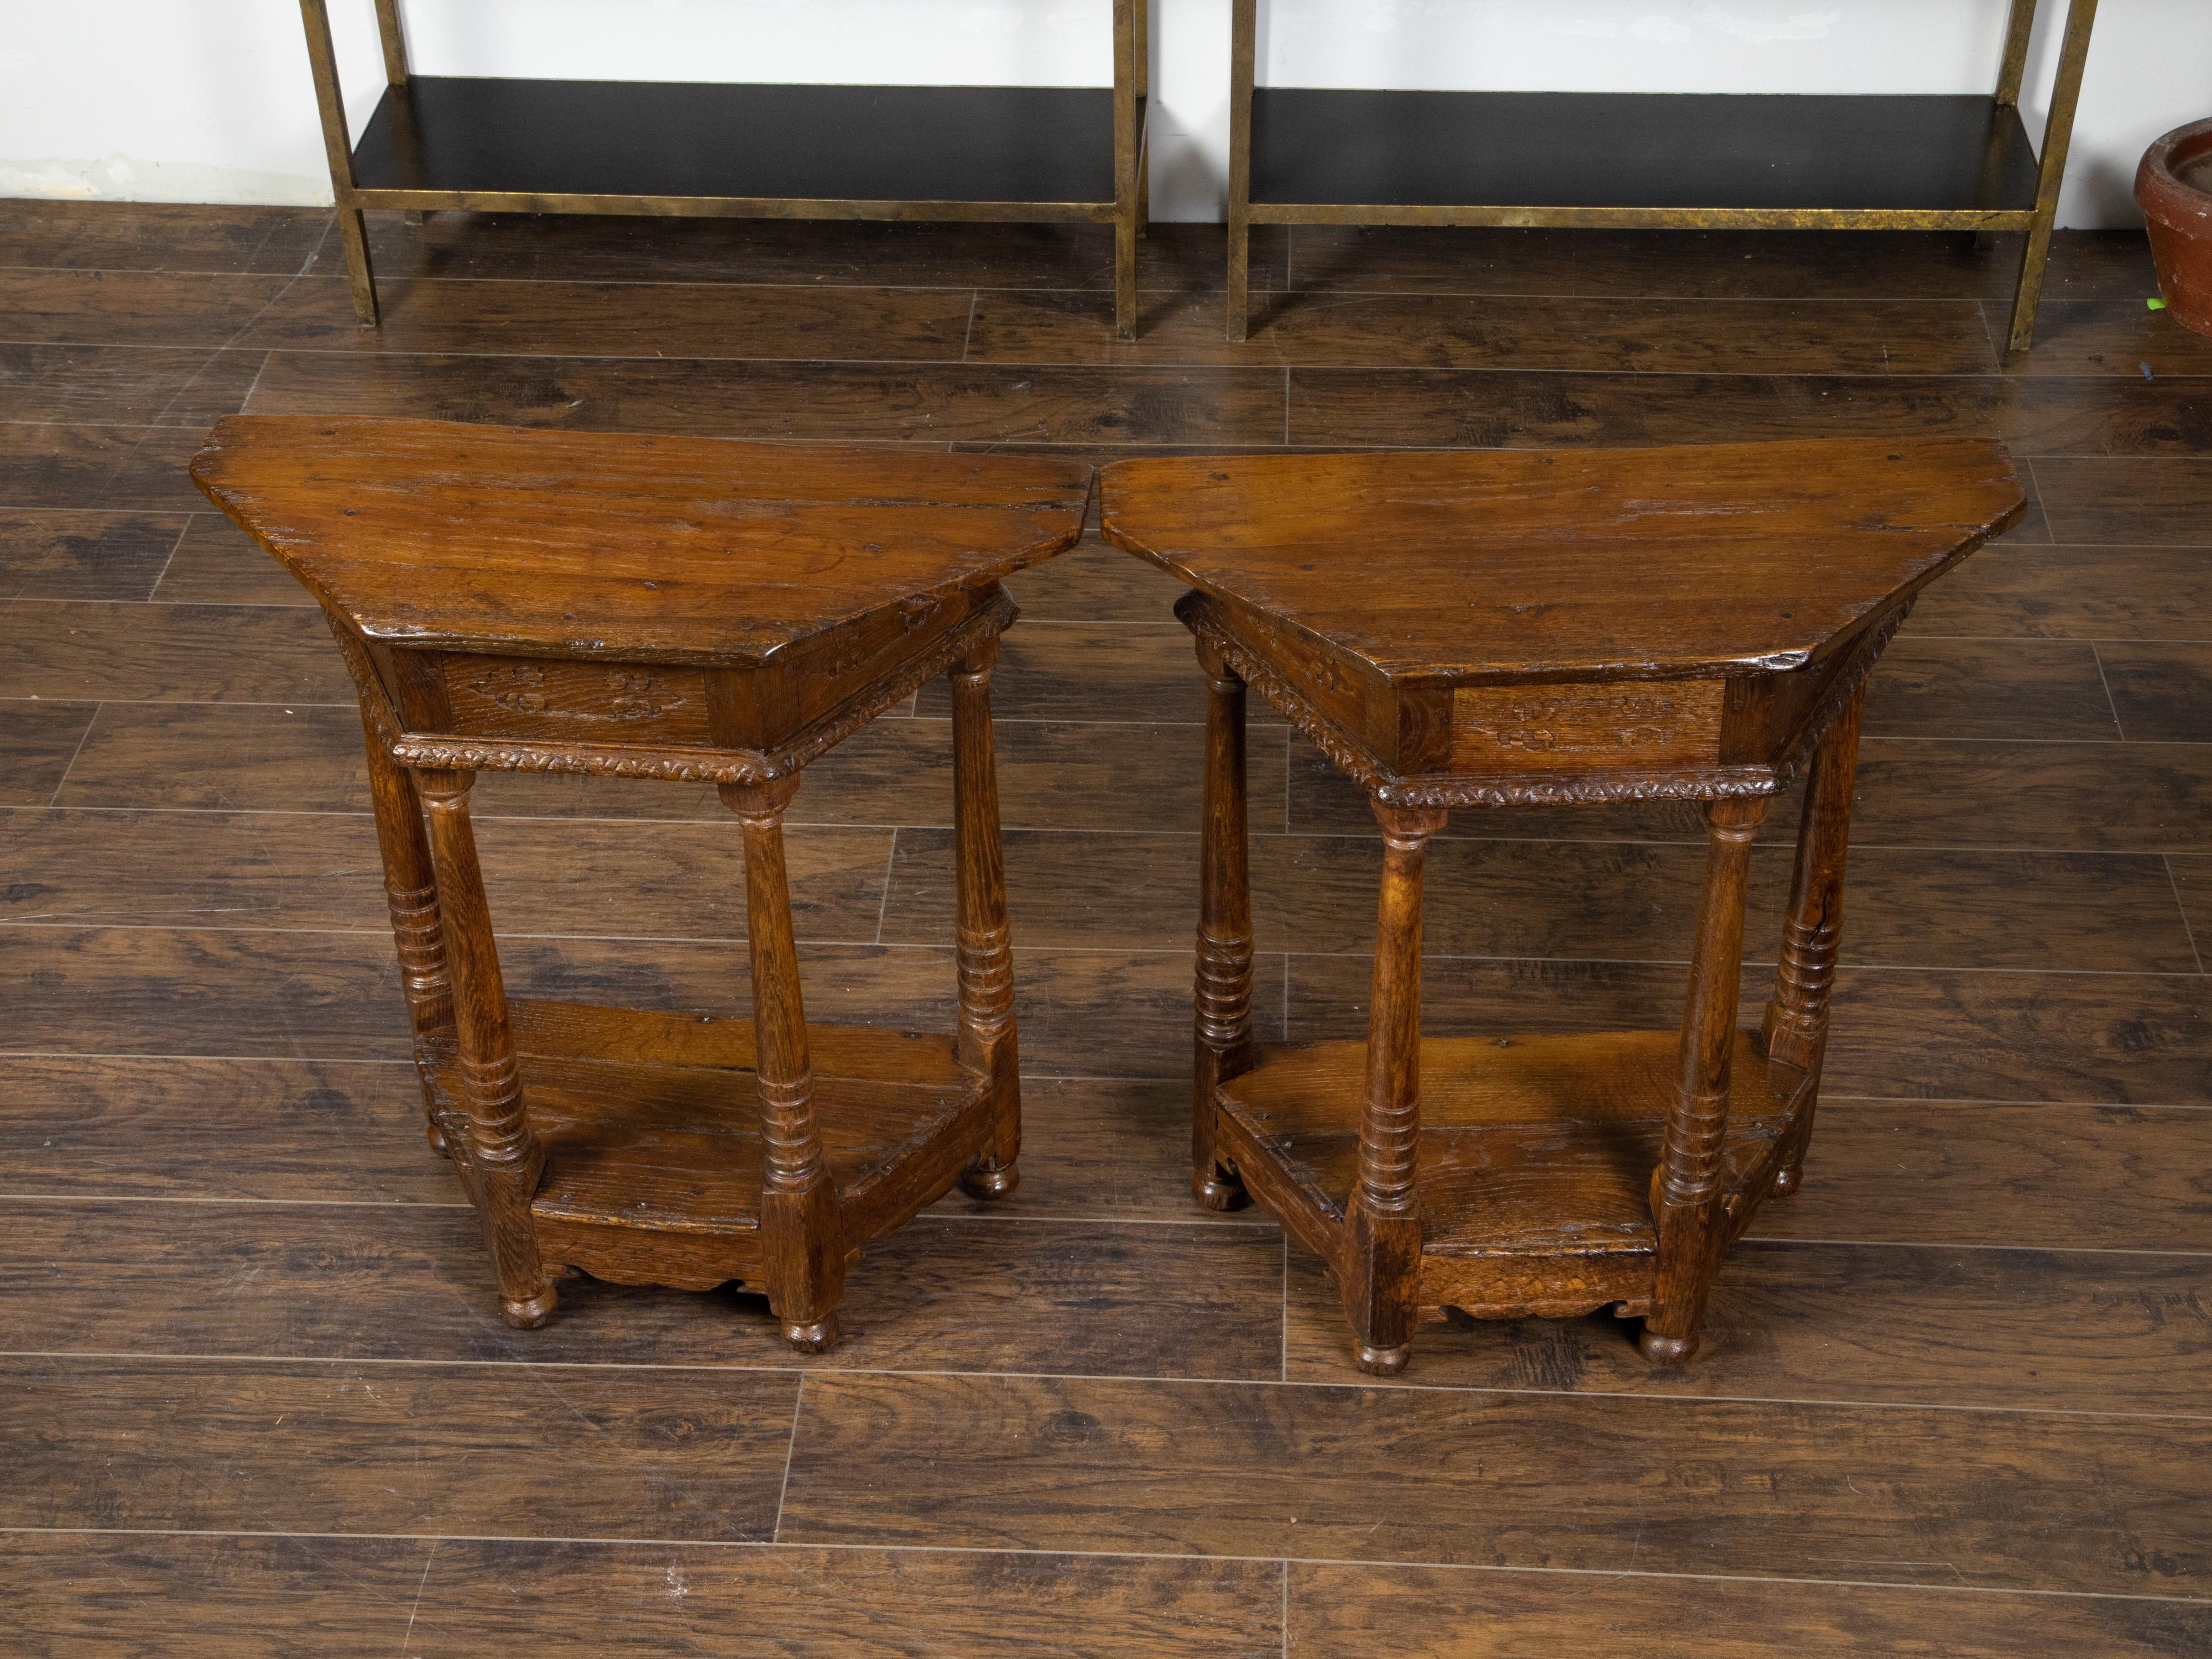 Pair of 19th Century English Carved Oak Demilune Tables with Column Legs For Sale 4